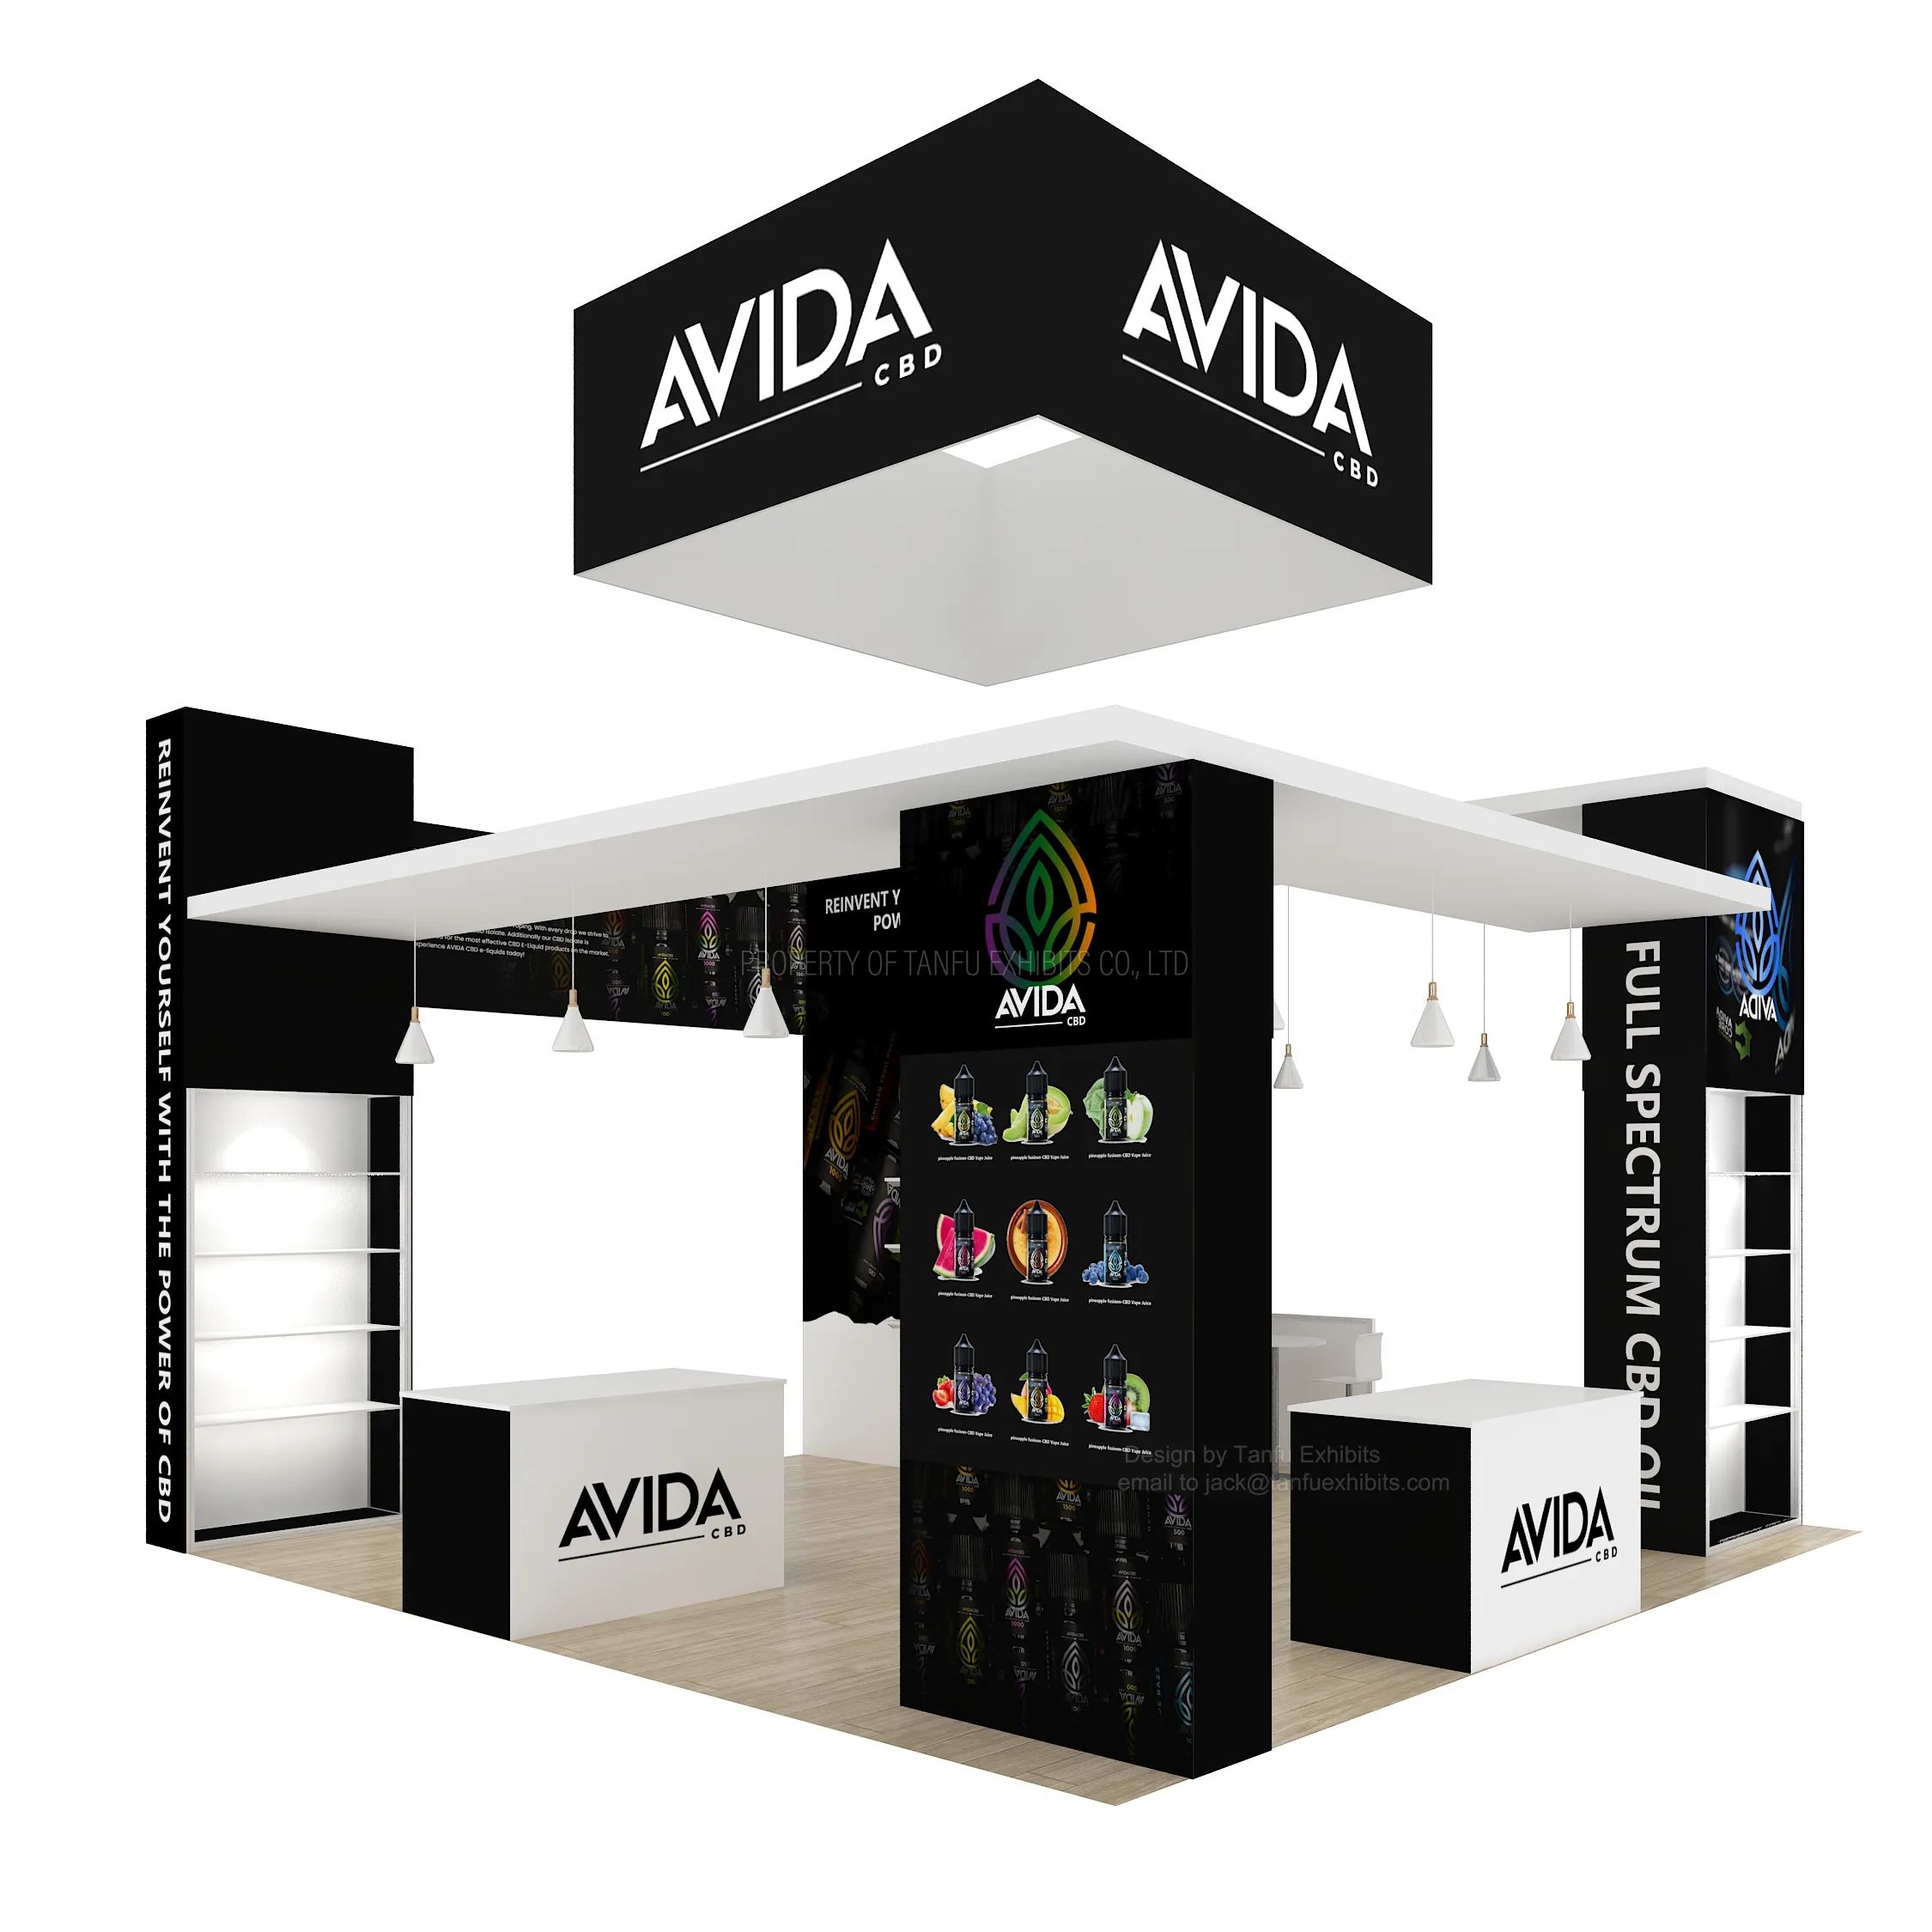 Trade Show 20x20 Exhibition Booth